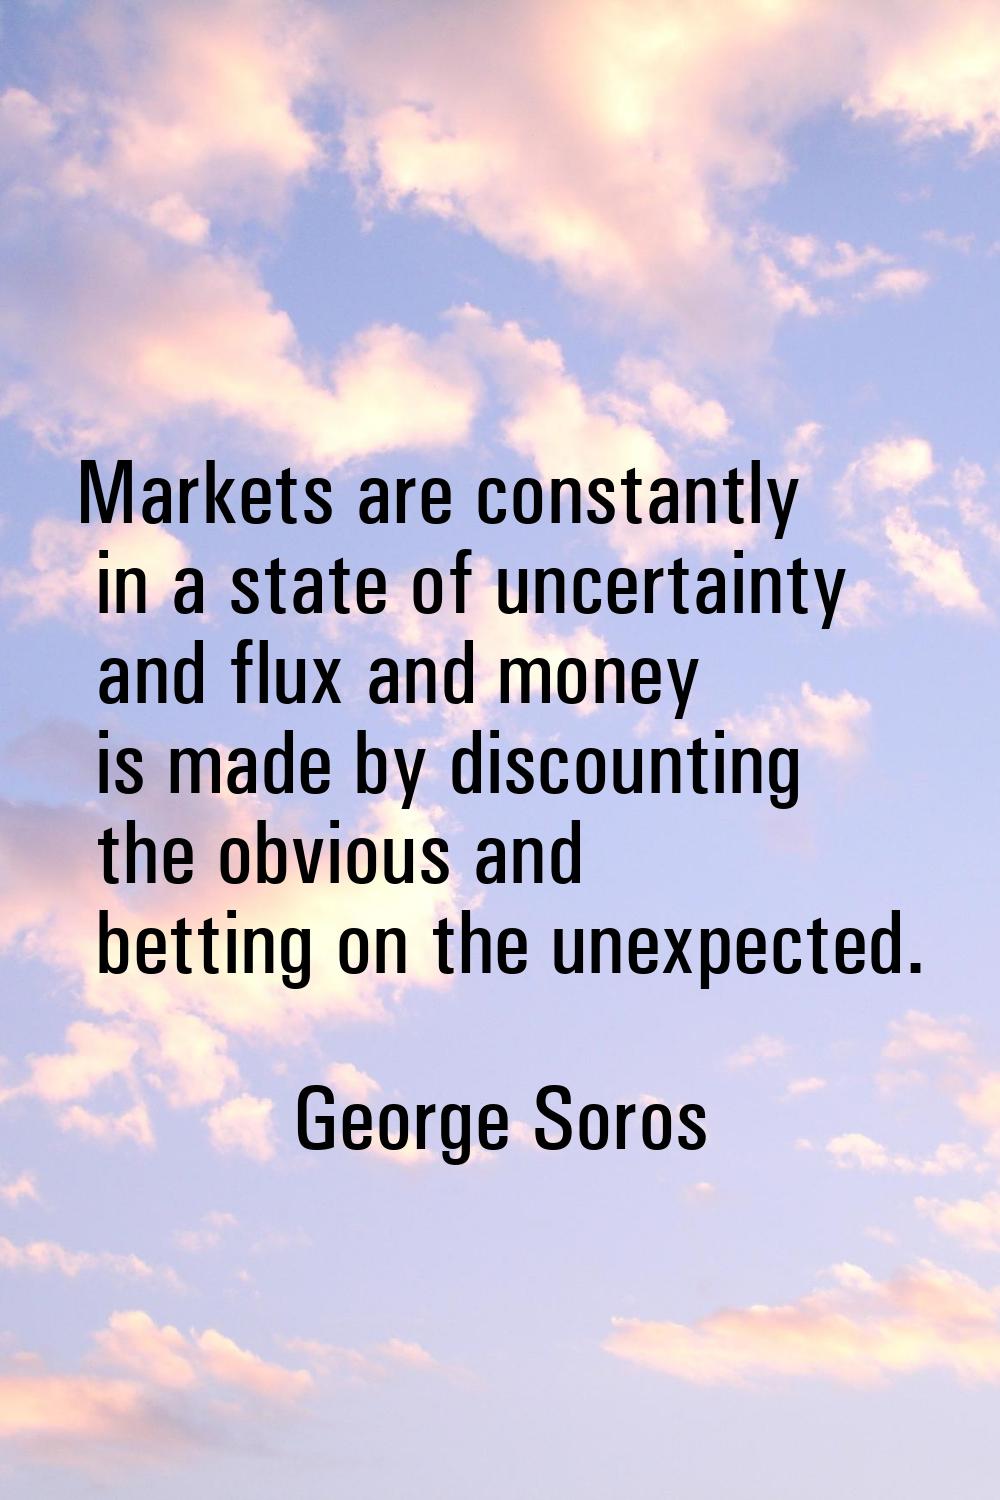 Markets are constantly in a state of uncertainty and flux and money is made by discounting the obvi